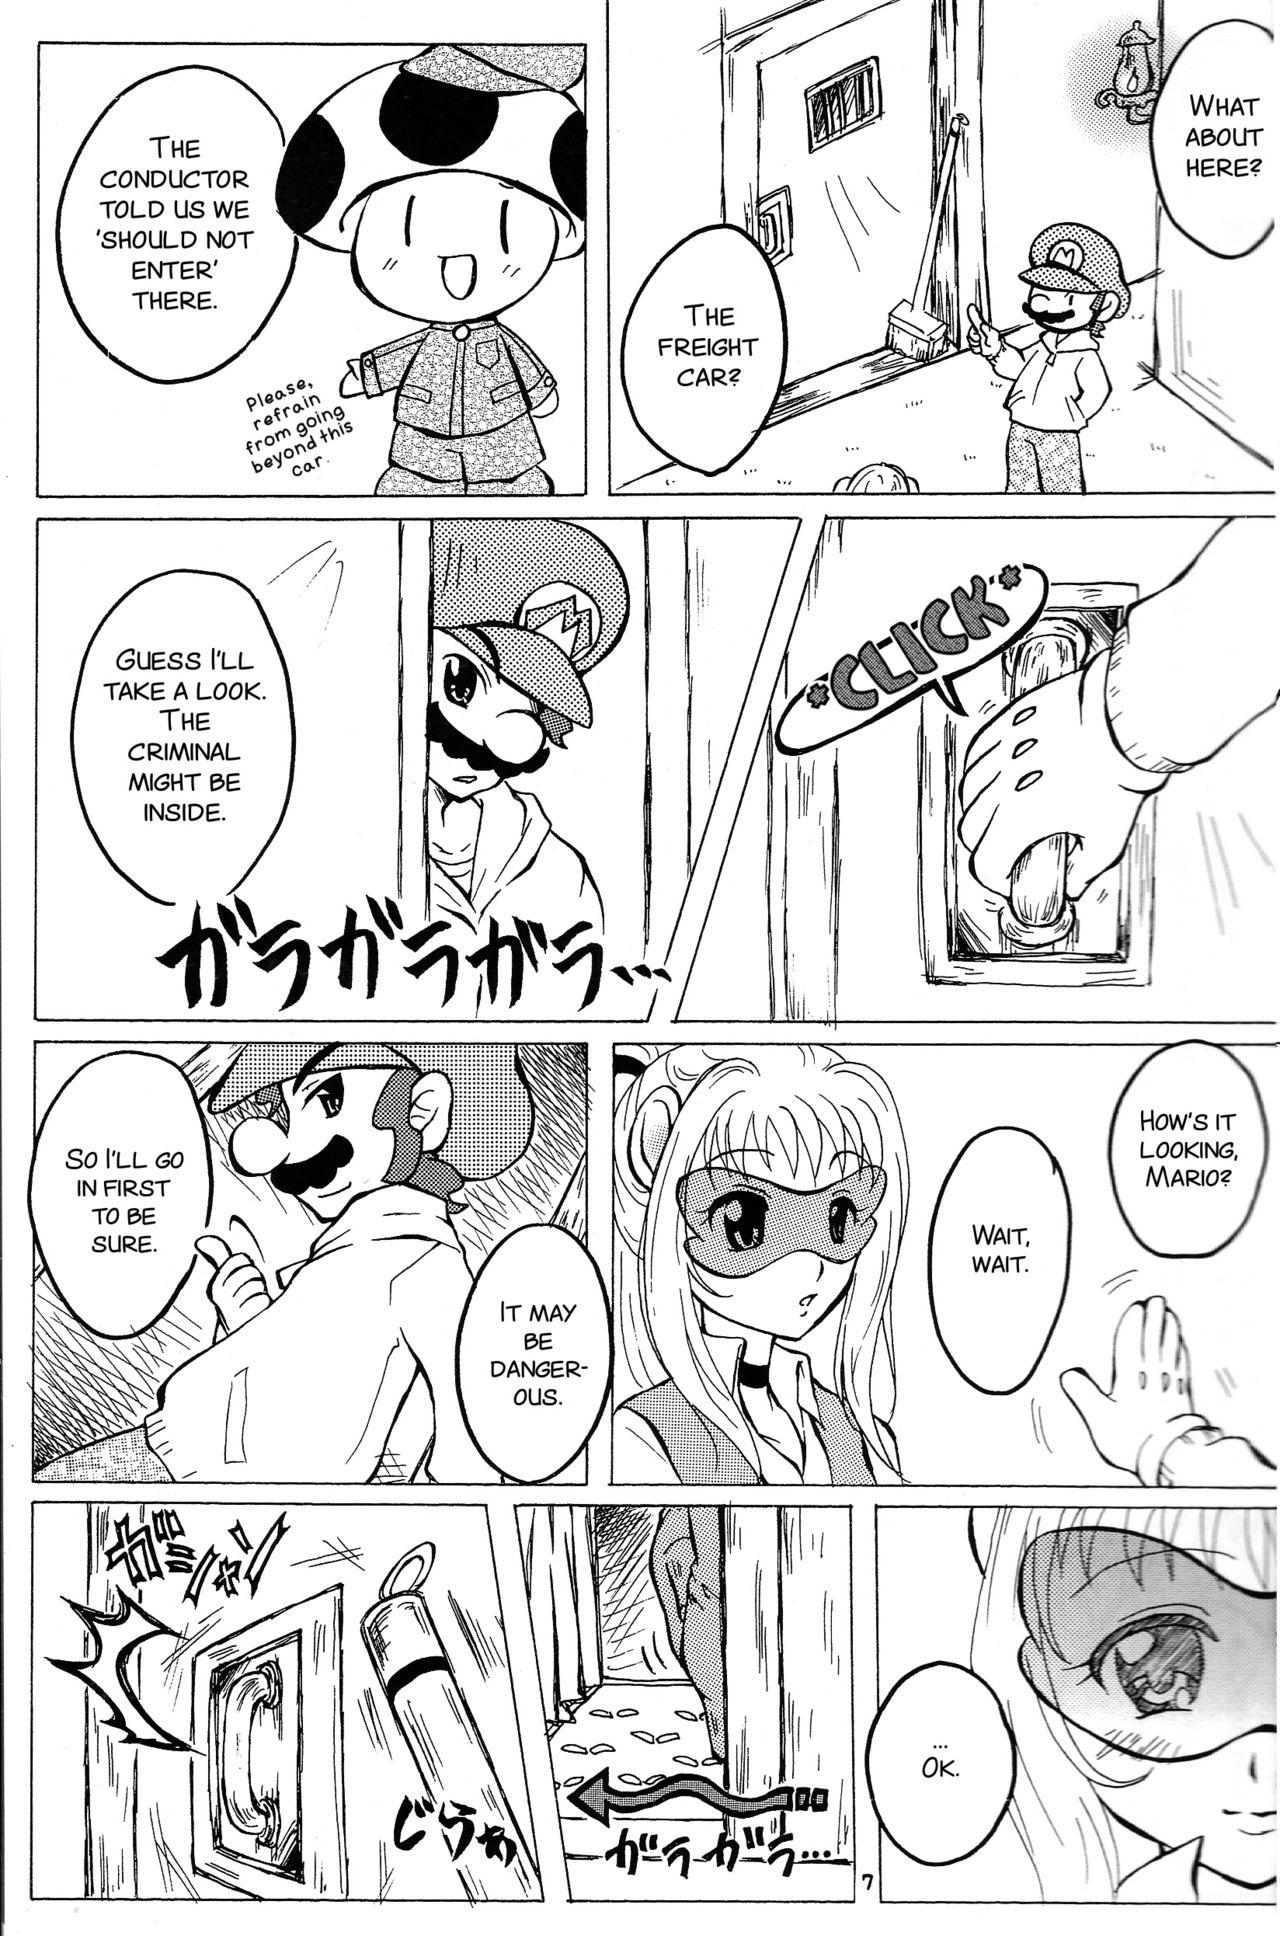 Penetration Machuchu 10 - Super mario brothers Tanned - Page 9